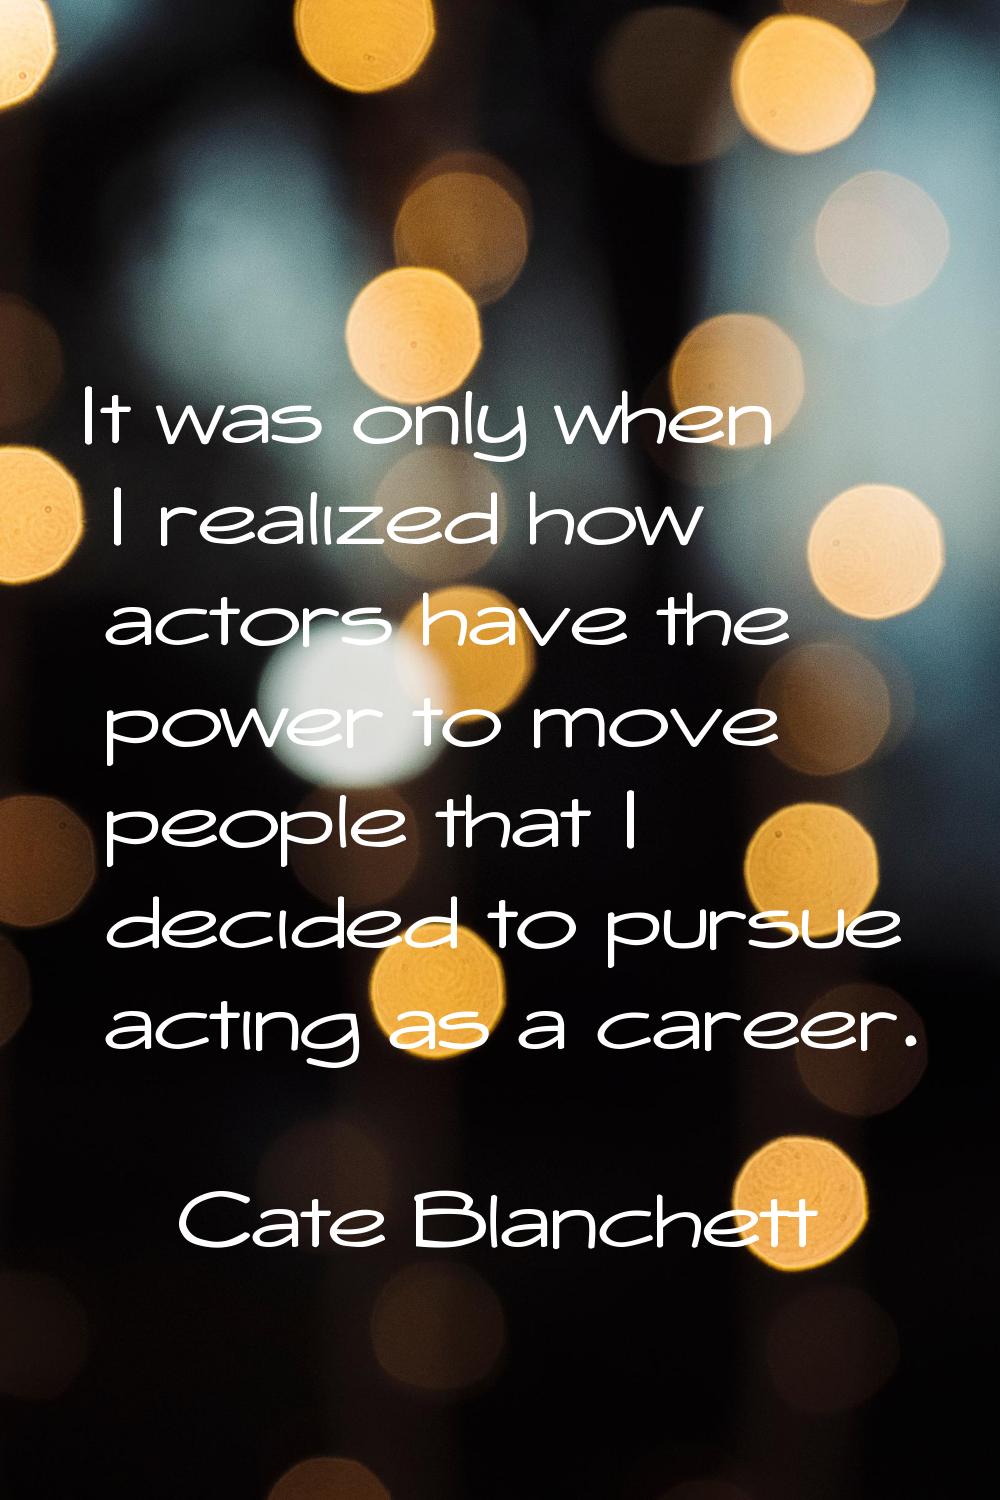 It was only when I realized how actors have the power to move people that I decided to pursue actin